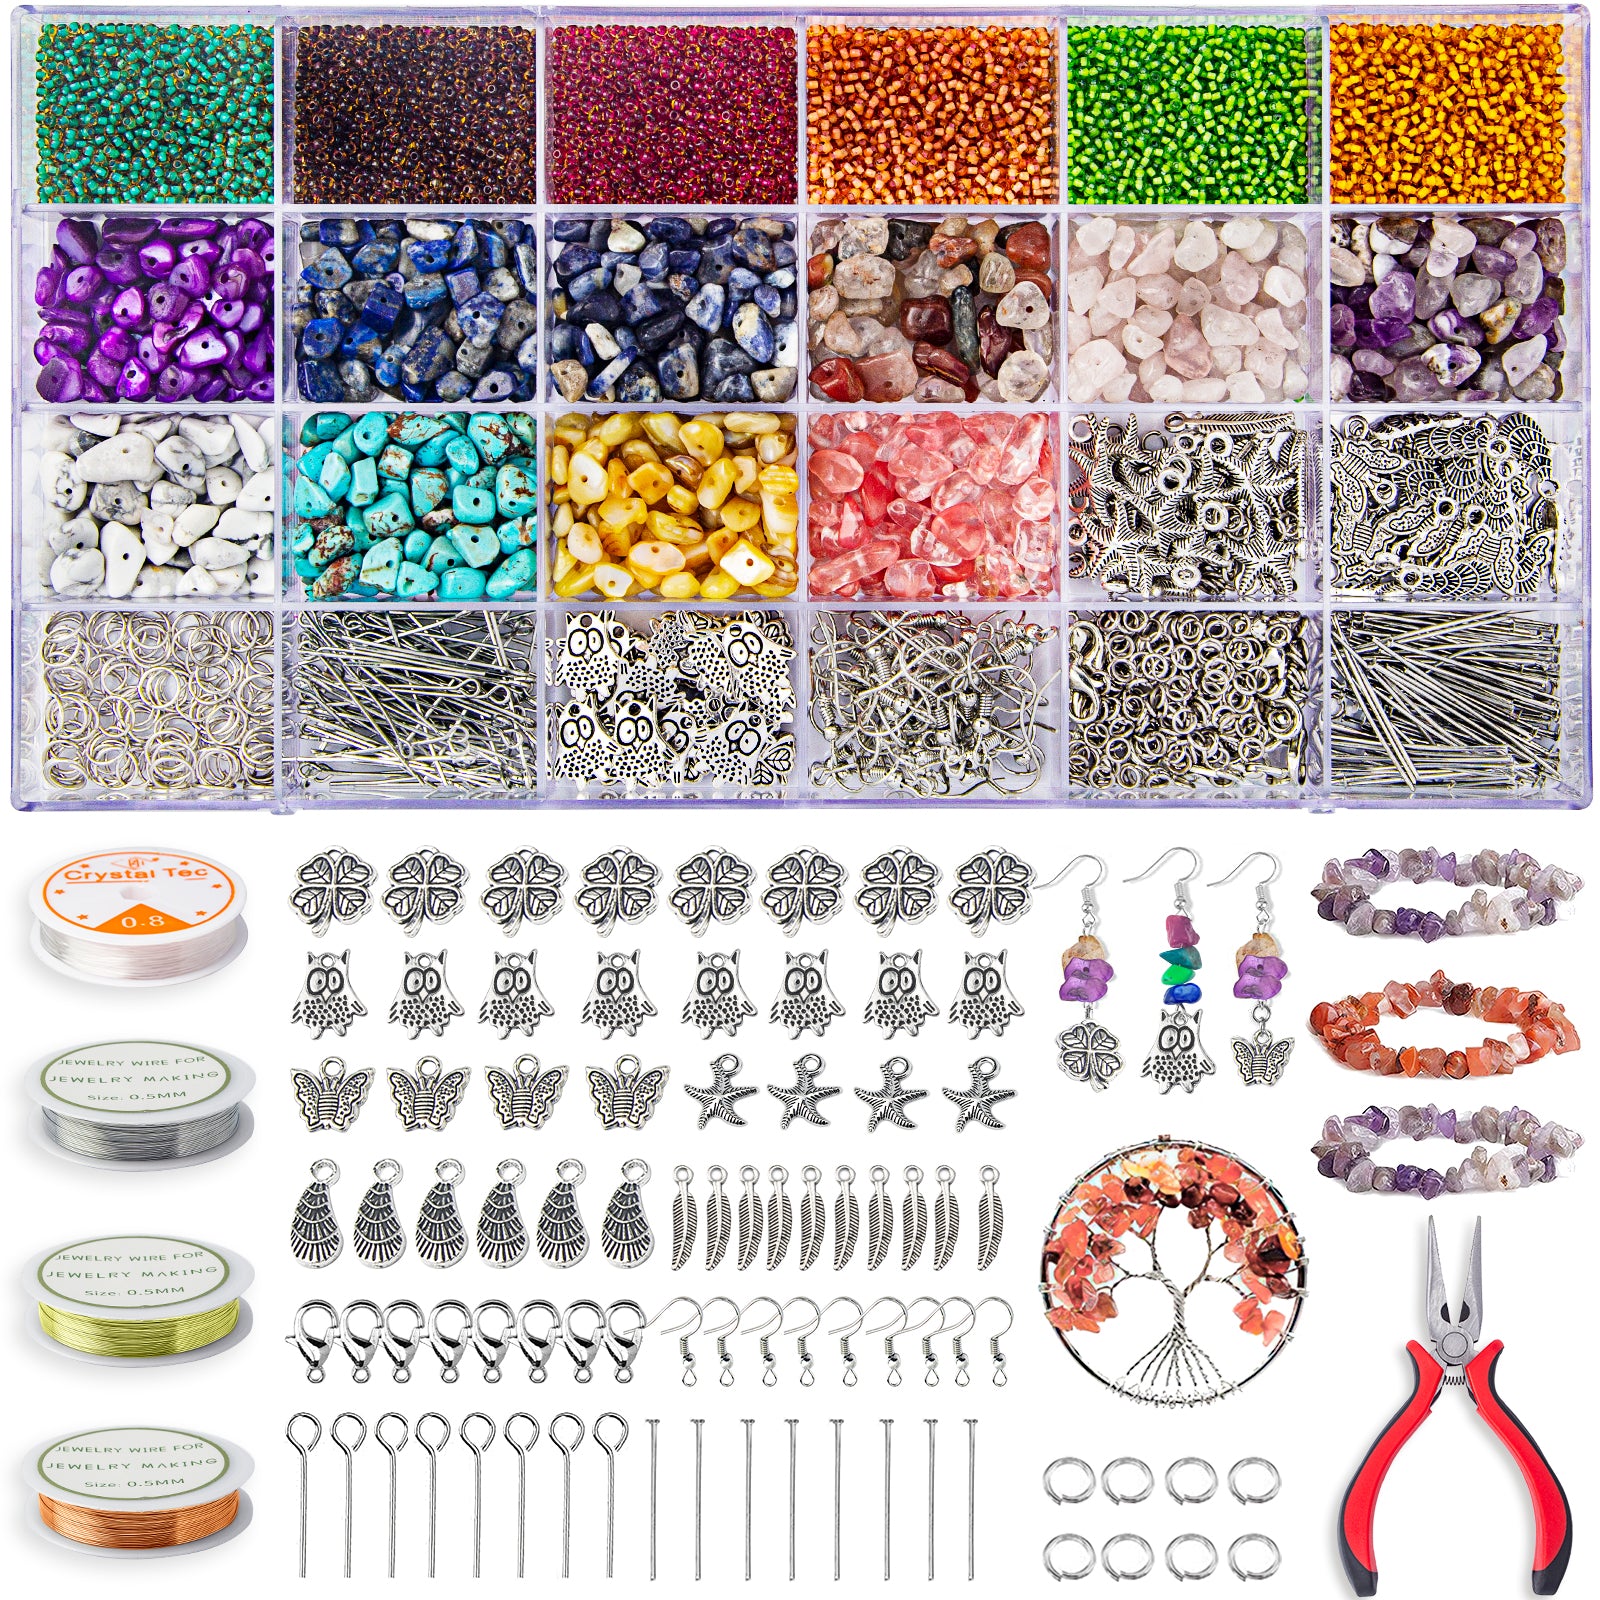 6000PCS Jewelry Making Kit -Seed Crystal Beads for Jewelry Making